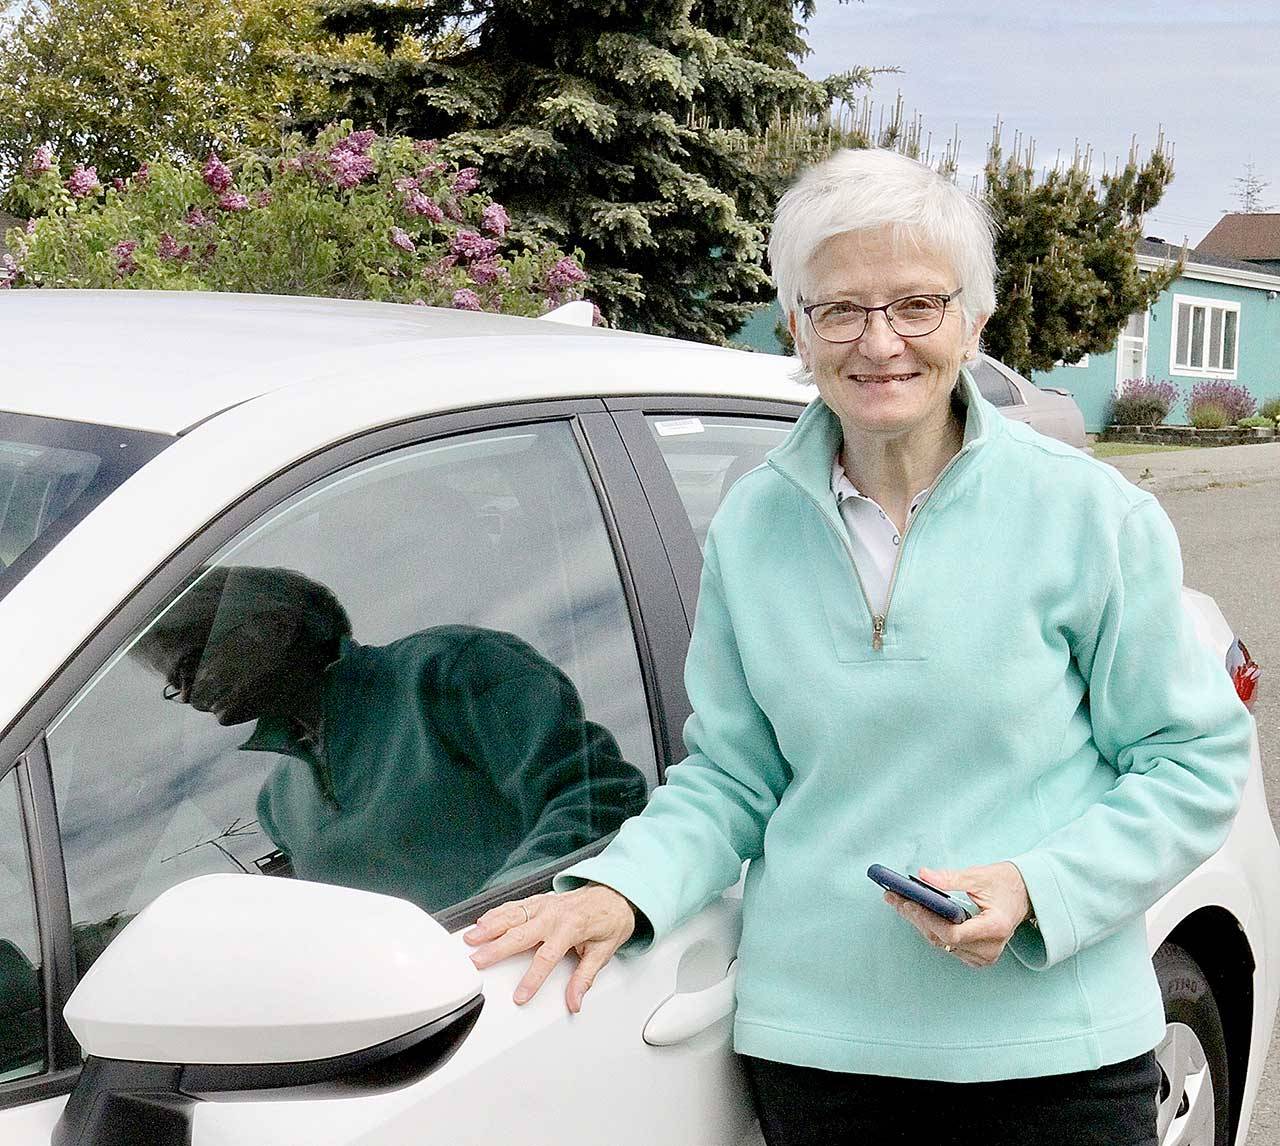 Marty Melcher of Port Angeles was awarded a 2021 Toyota Corolla when her duck was pulled Sunday as the winner of the 32nd Great Olympic Peninsula Duck Derby at Lincoln Park. “I’m totally flummoxed,” she said. Wilder Toyota donated the vehicle for the annual fundraiser, which brought in a record $115,000 for the Olympic Medical Foundation.